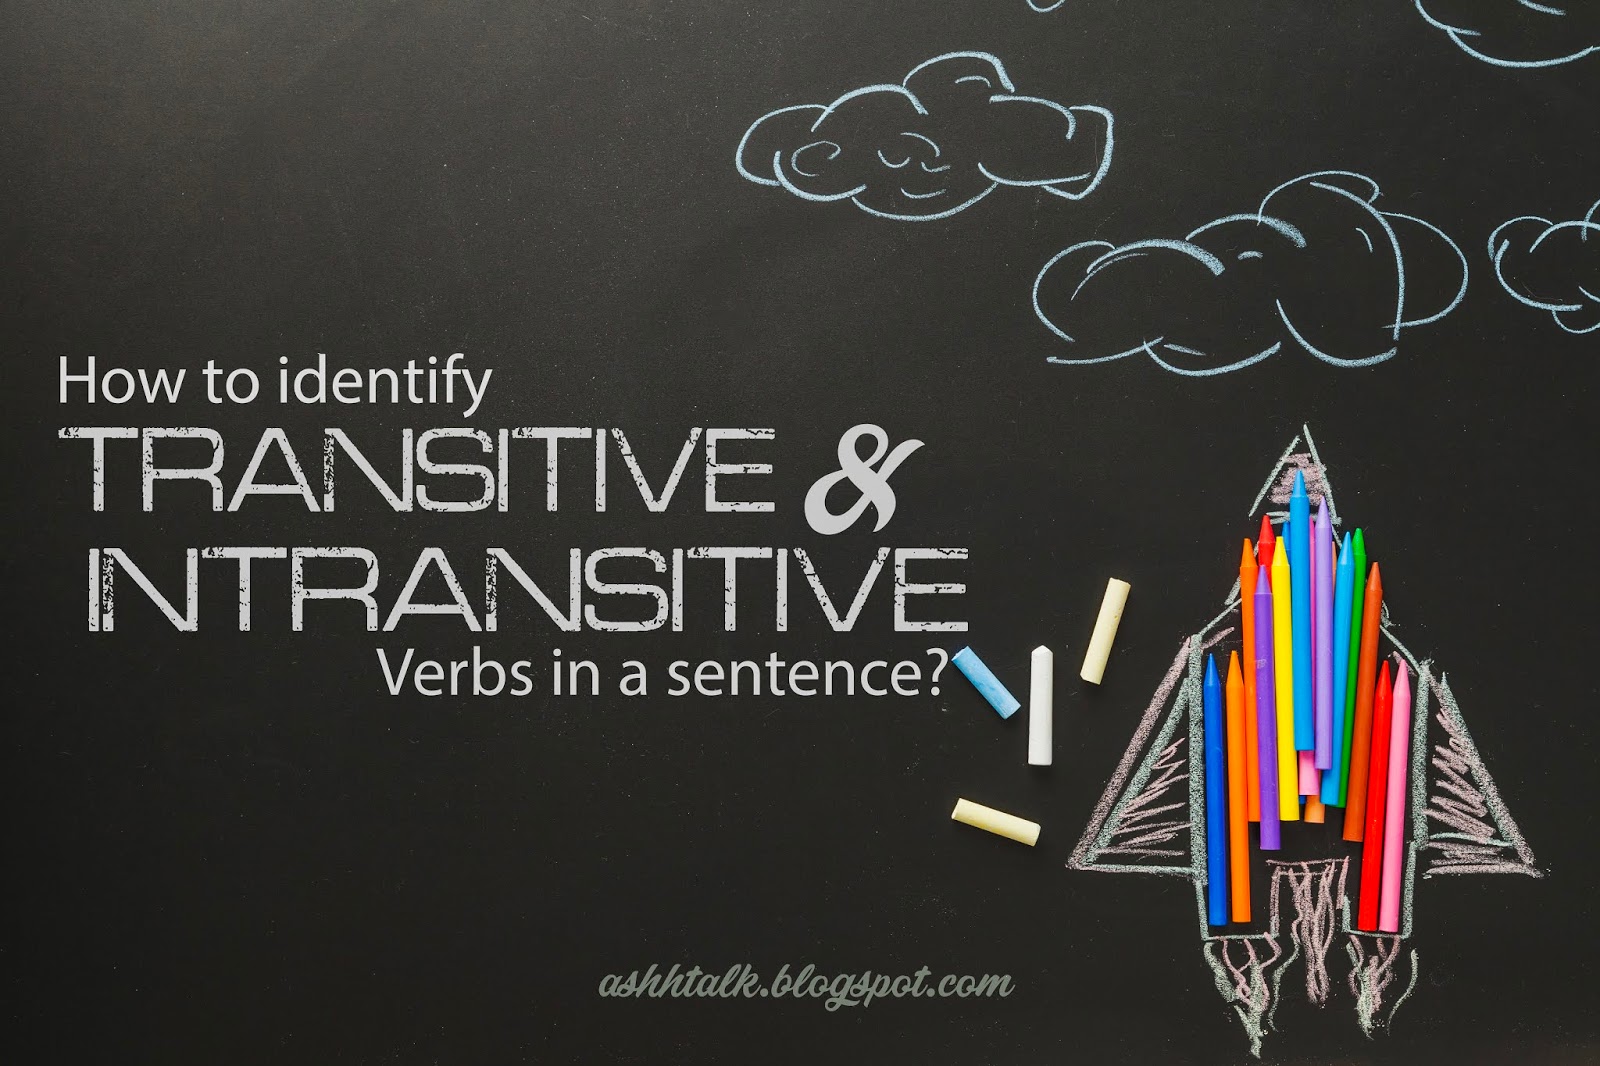 how-to-identify-transitive-and-intransitive-verb-in-a-sentence-ash-talk